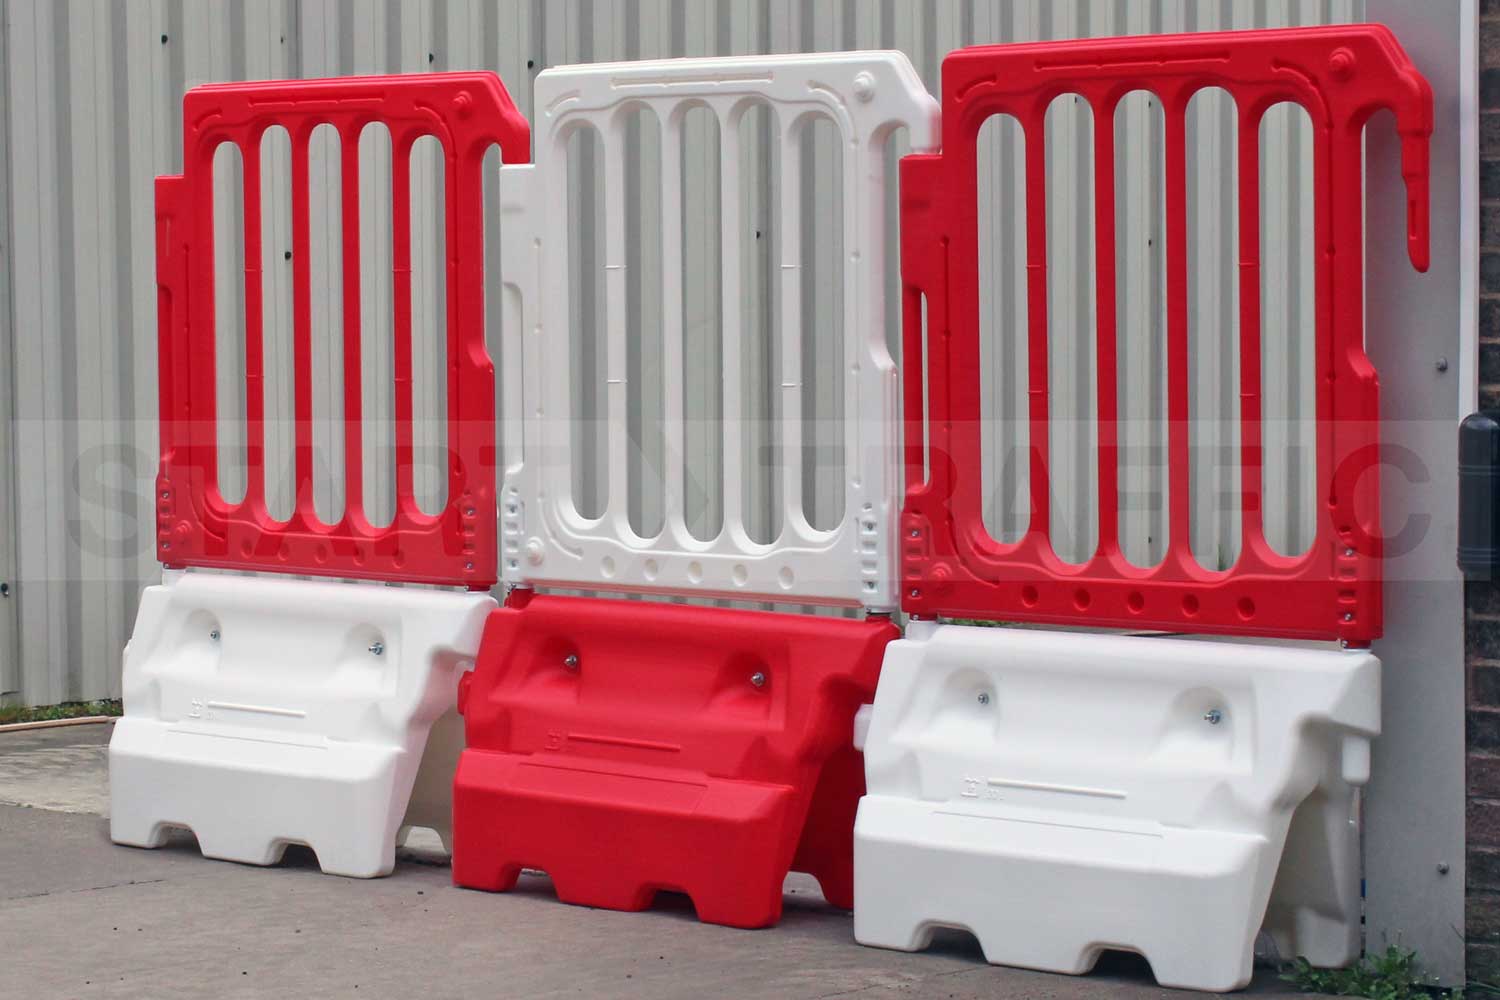 DoubleTop Barrier toppers on HOG600 Barriers